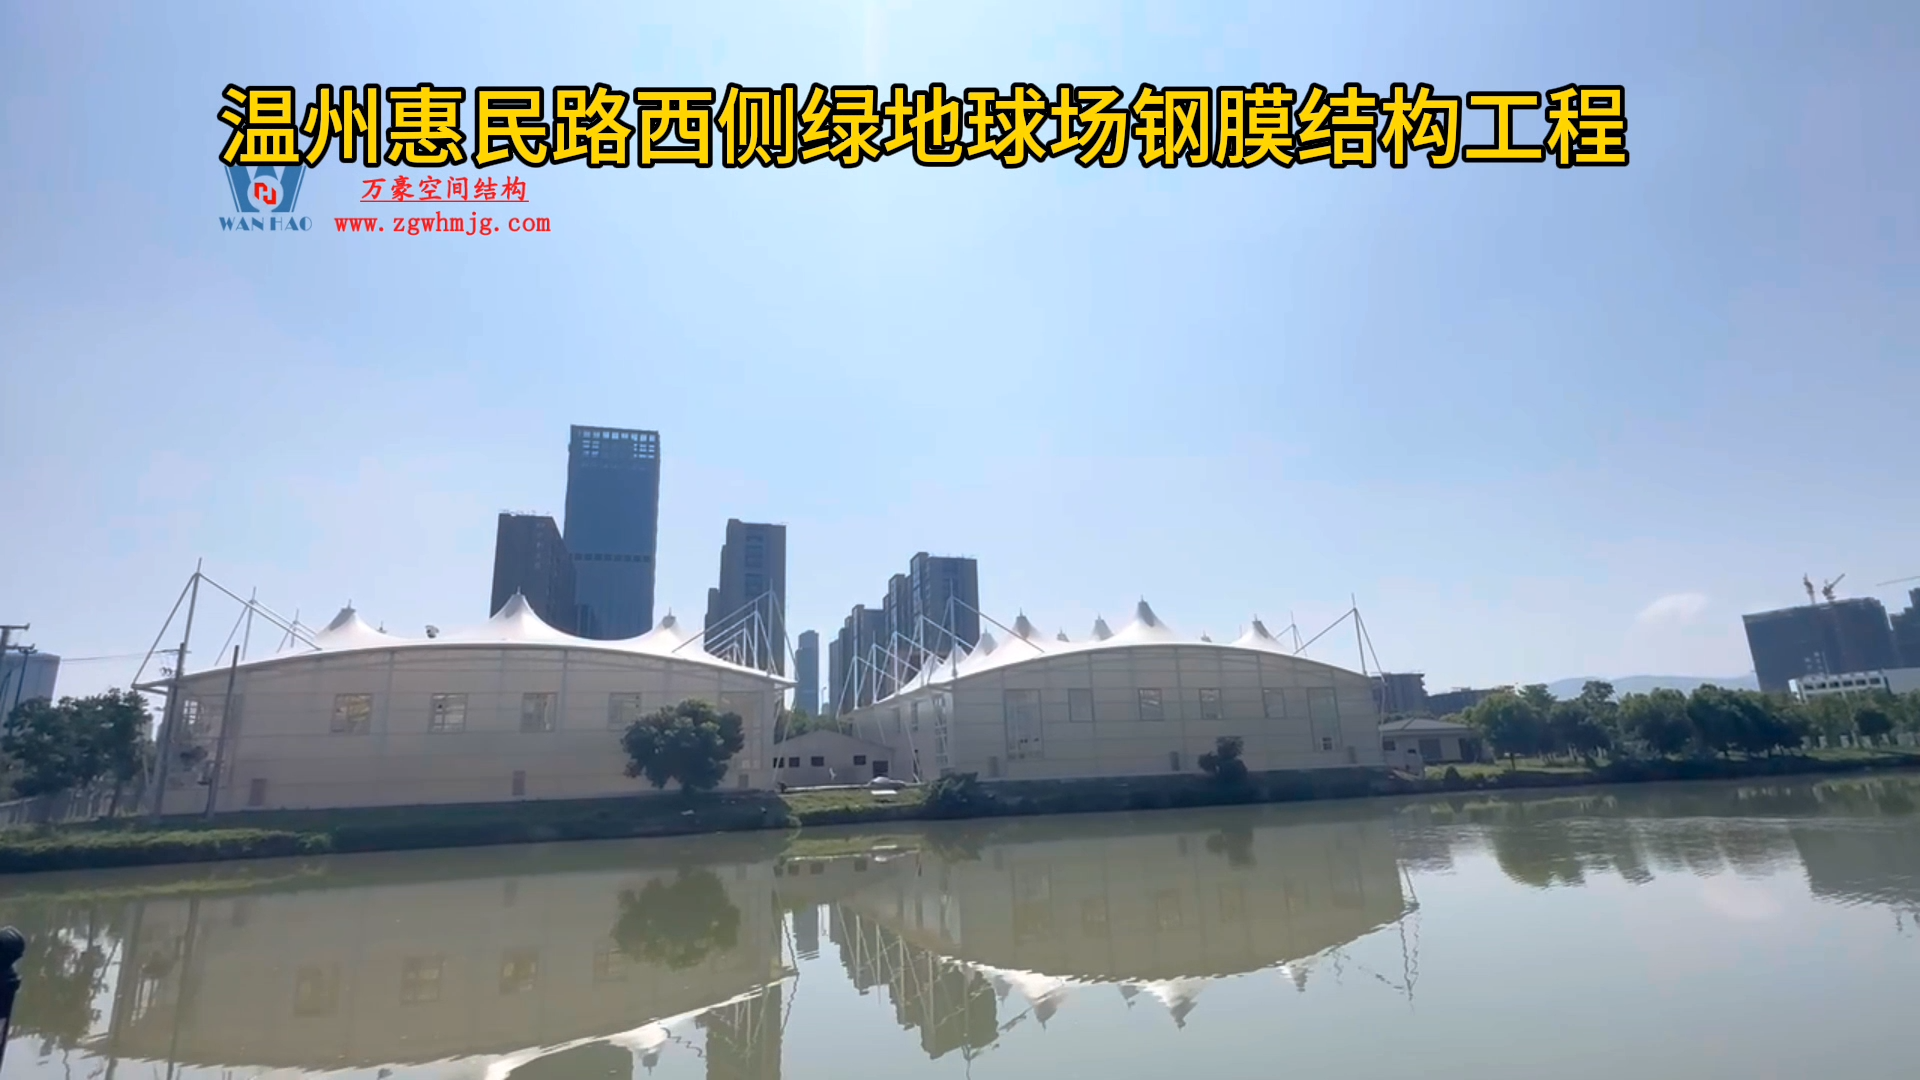 Wenzhou Huimin Road west green stadium PTFE membrane structure project video